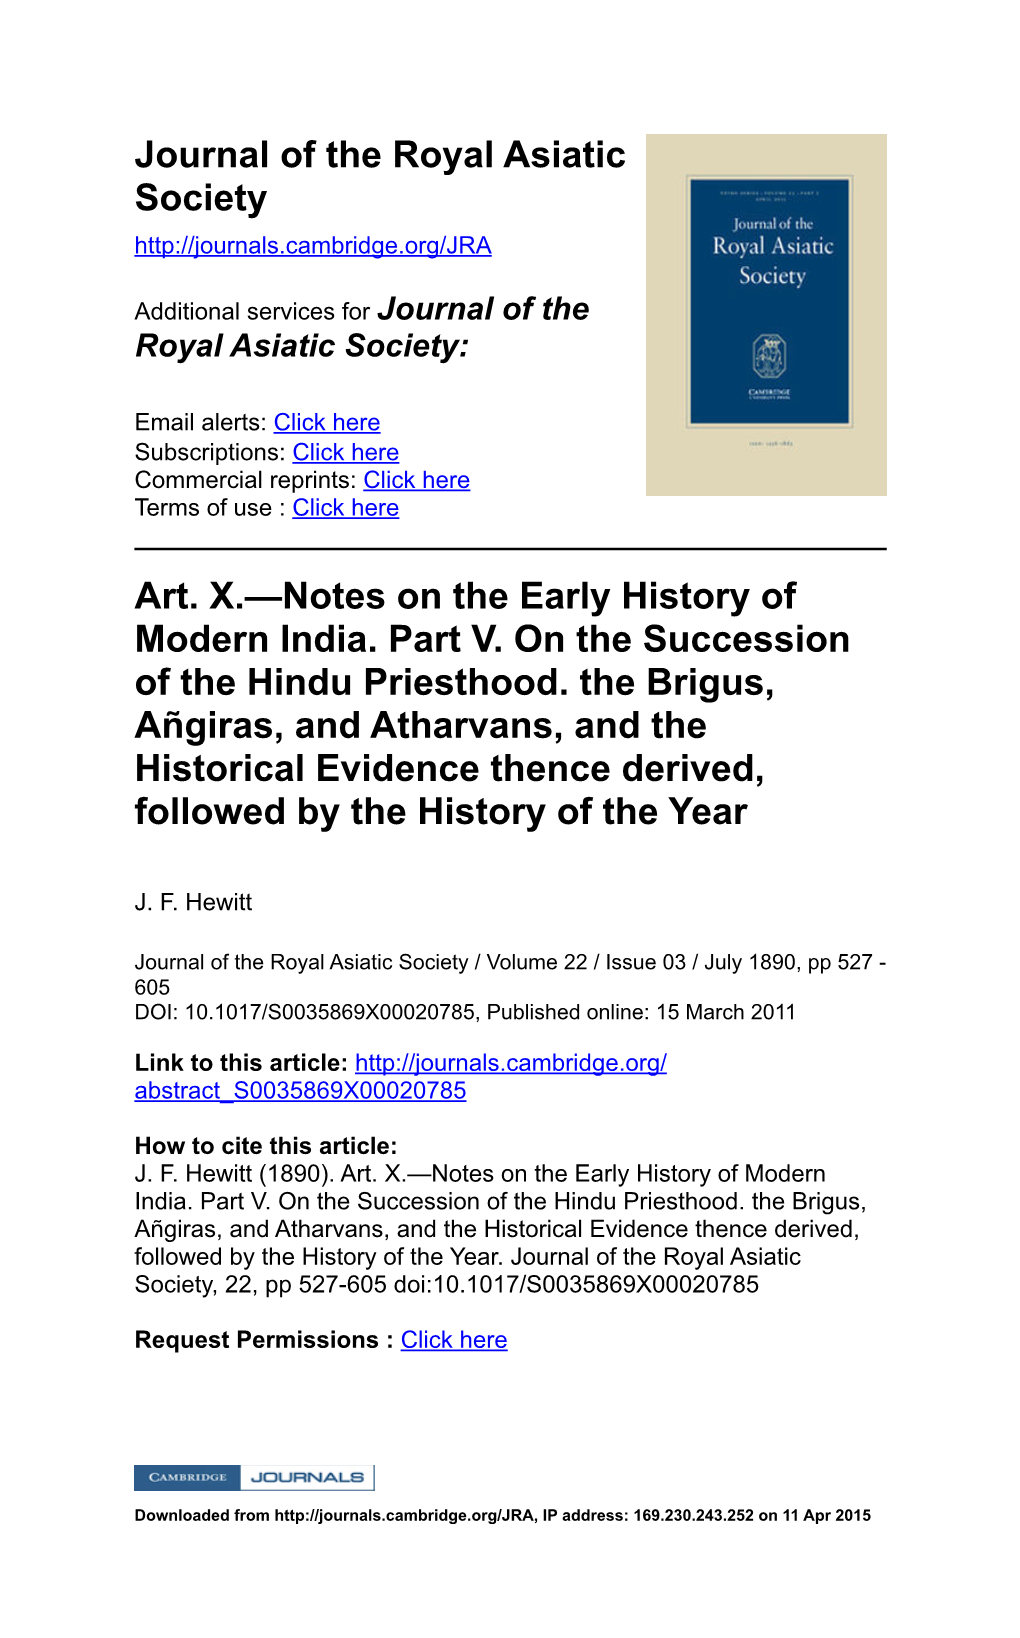 Journal of the Royal Asiatic Society Art. X